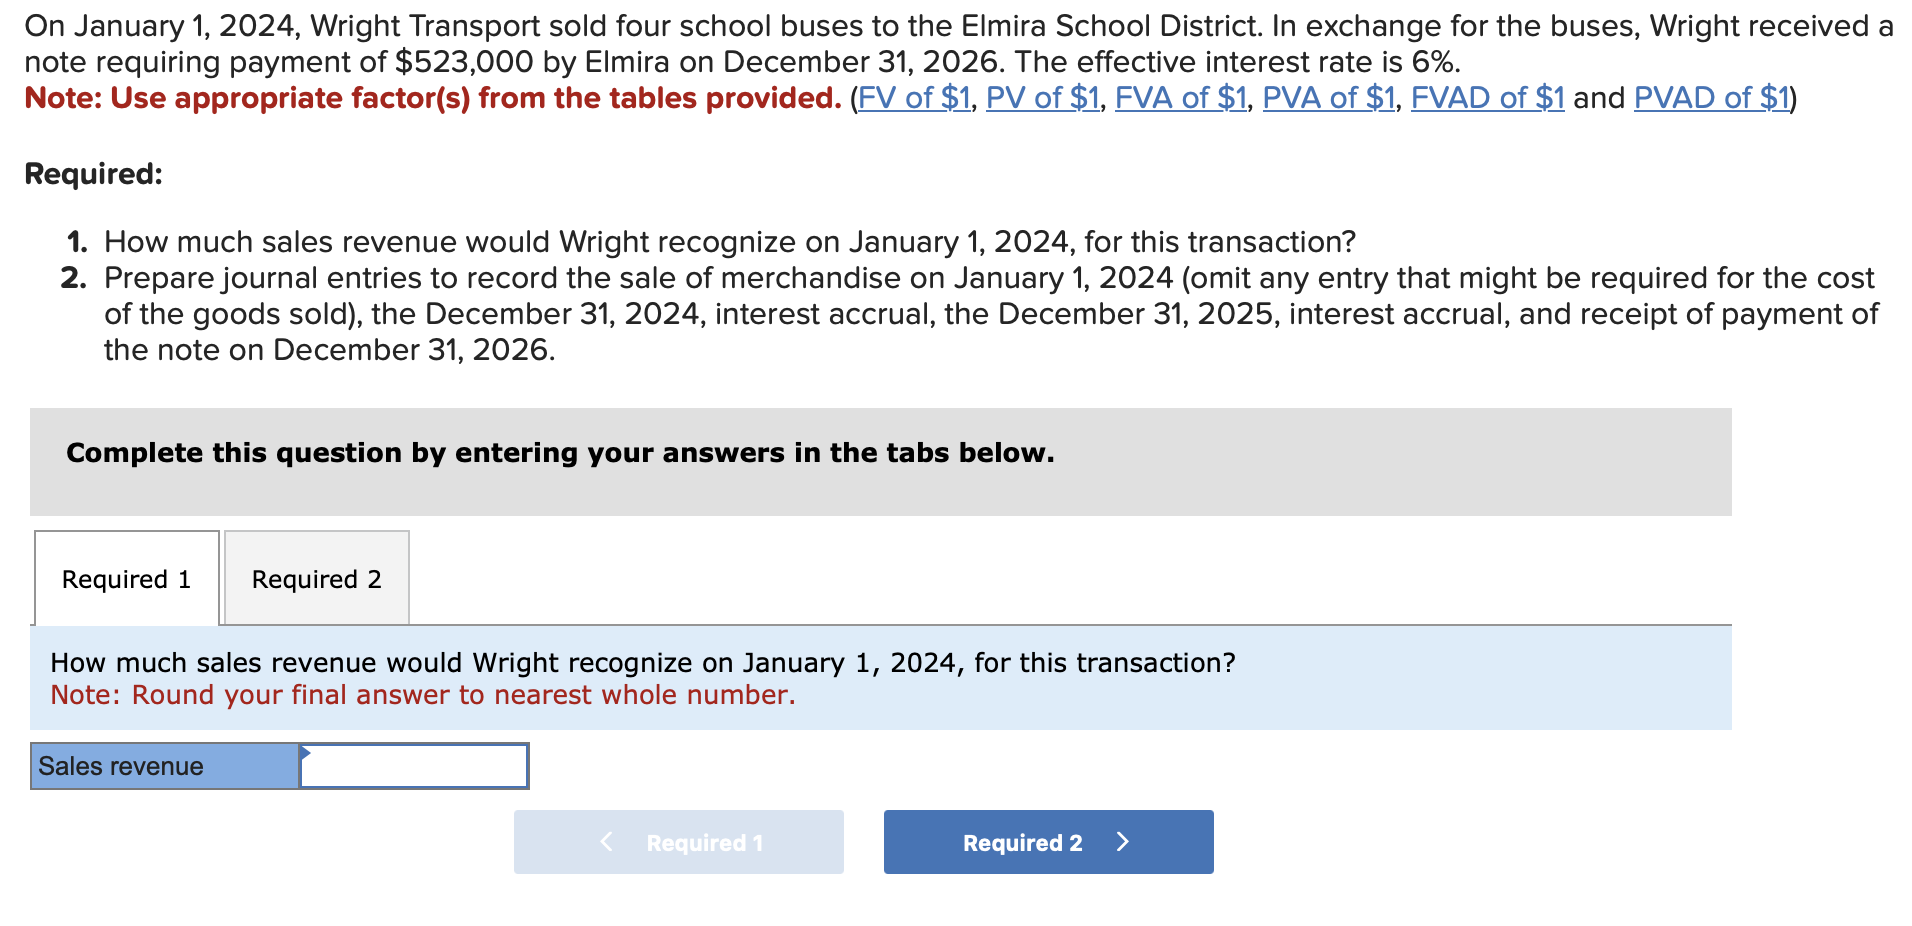 solved-on-january-1-2024-wright-transport-sold-four-school-chegg